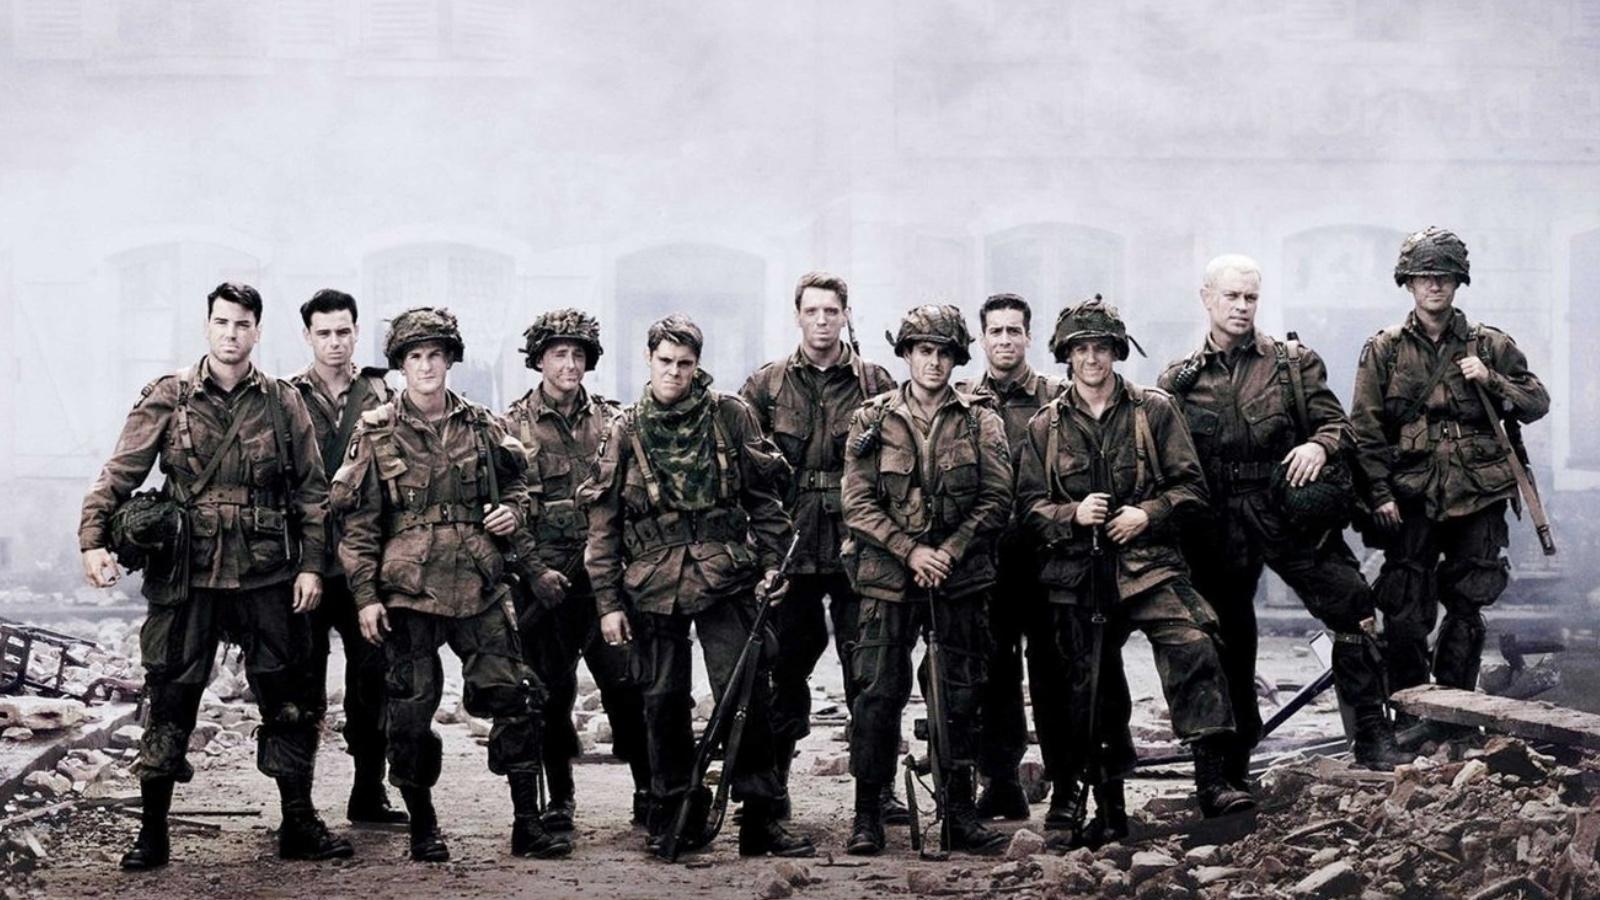 Leading cast of Band of Brothers